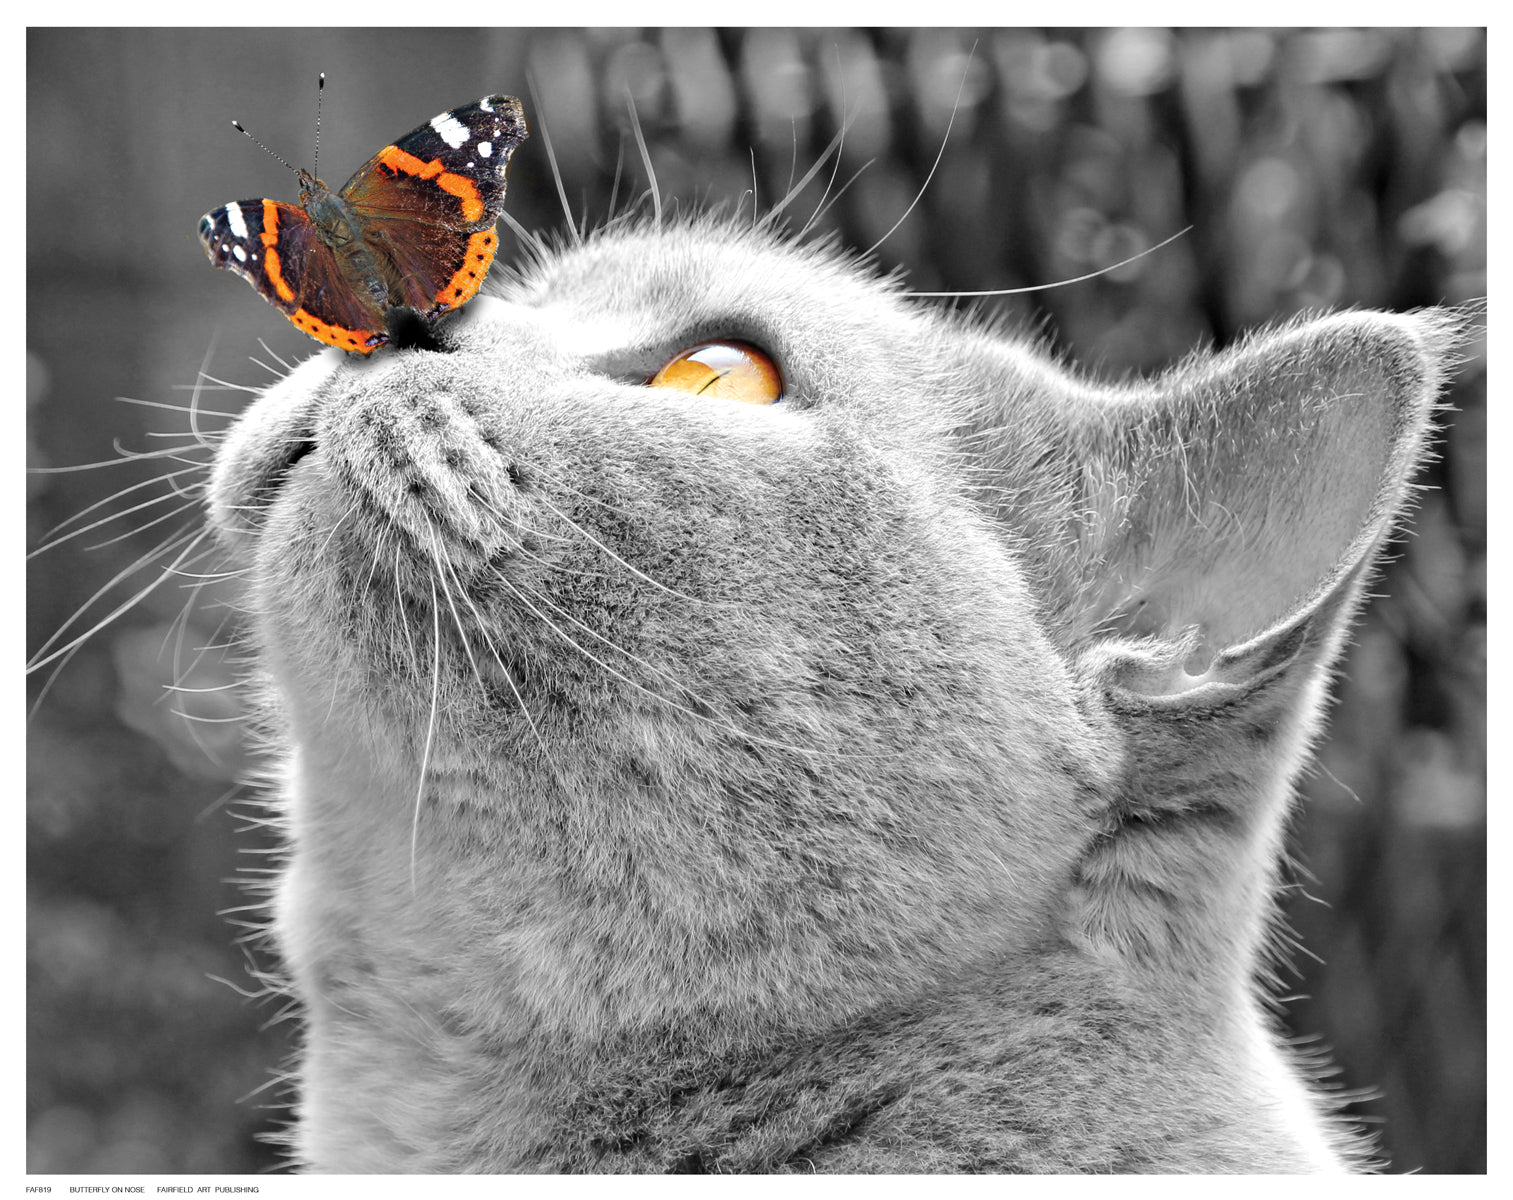 Butterfly on Nose by Anon - FairField Art Publishing